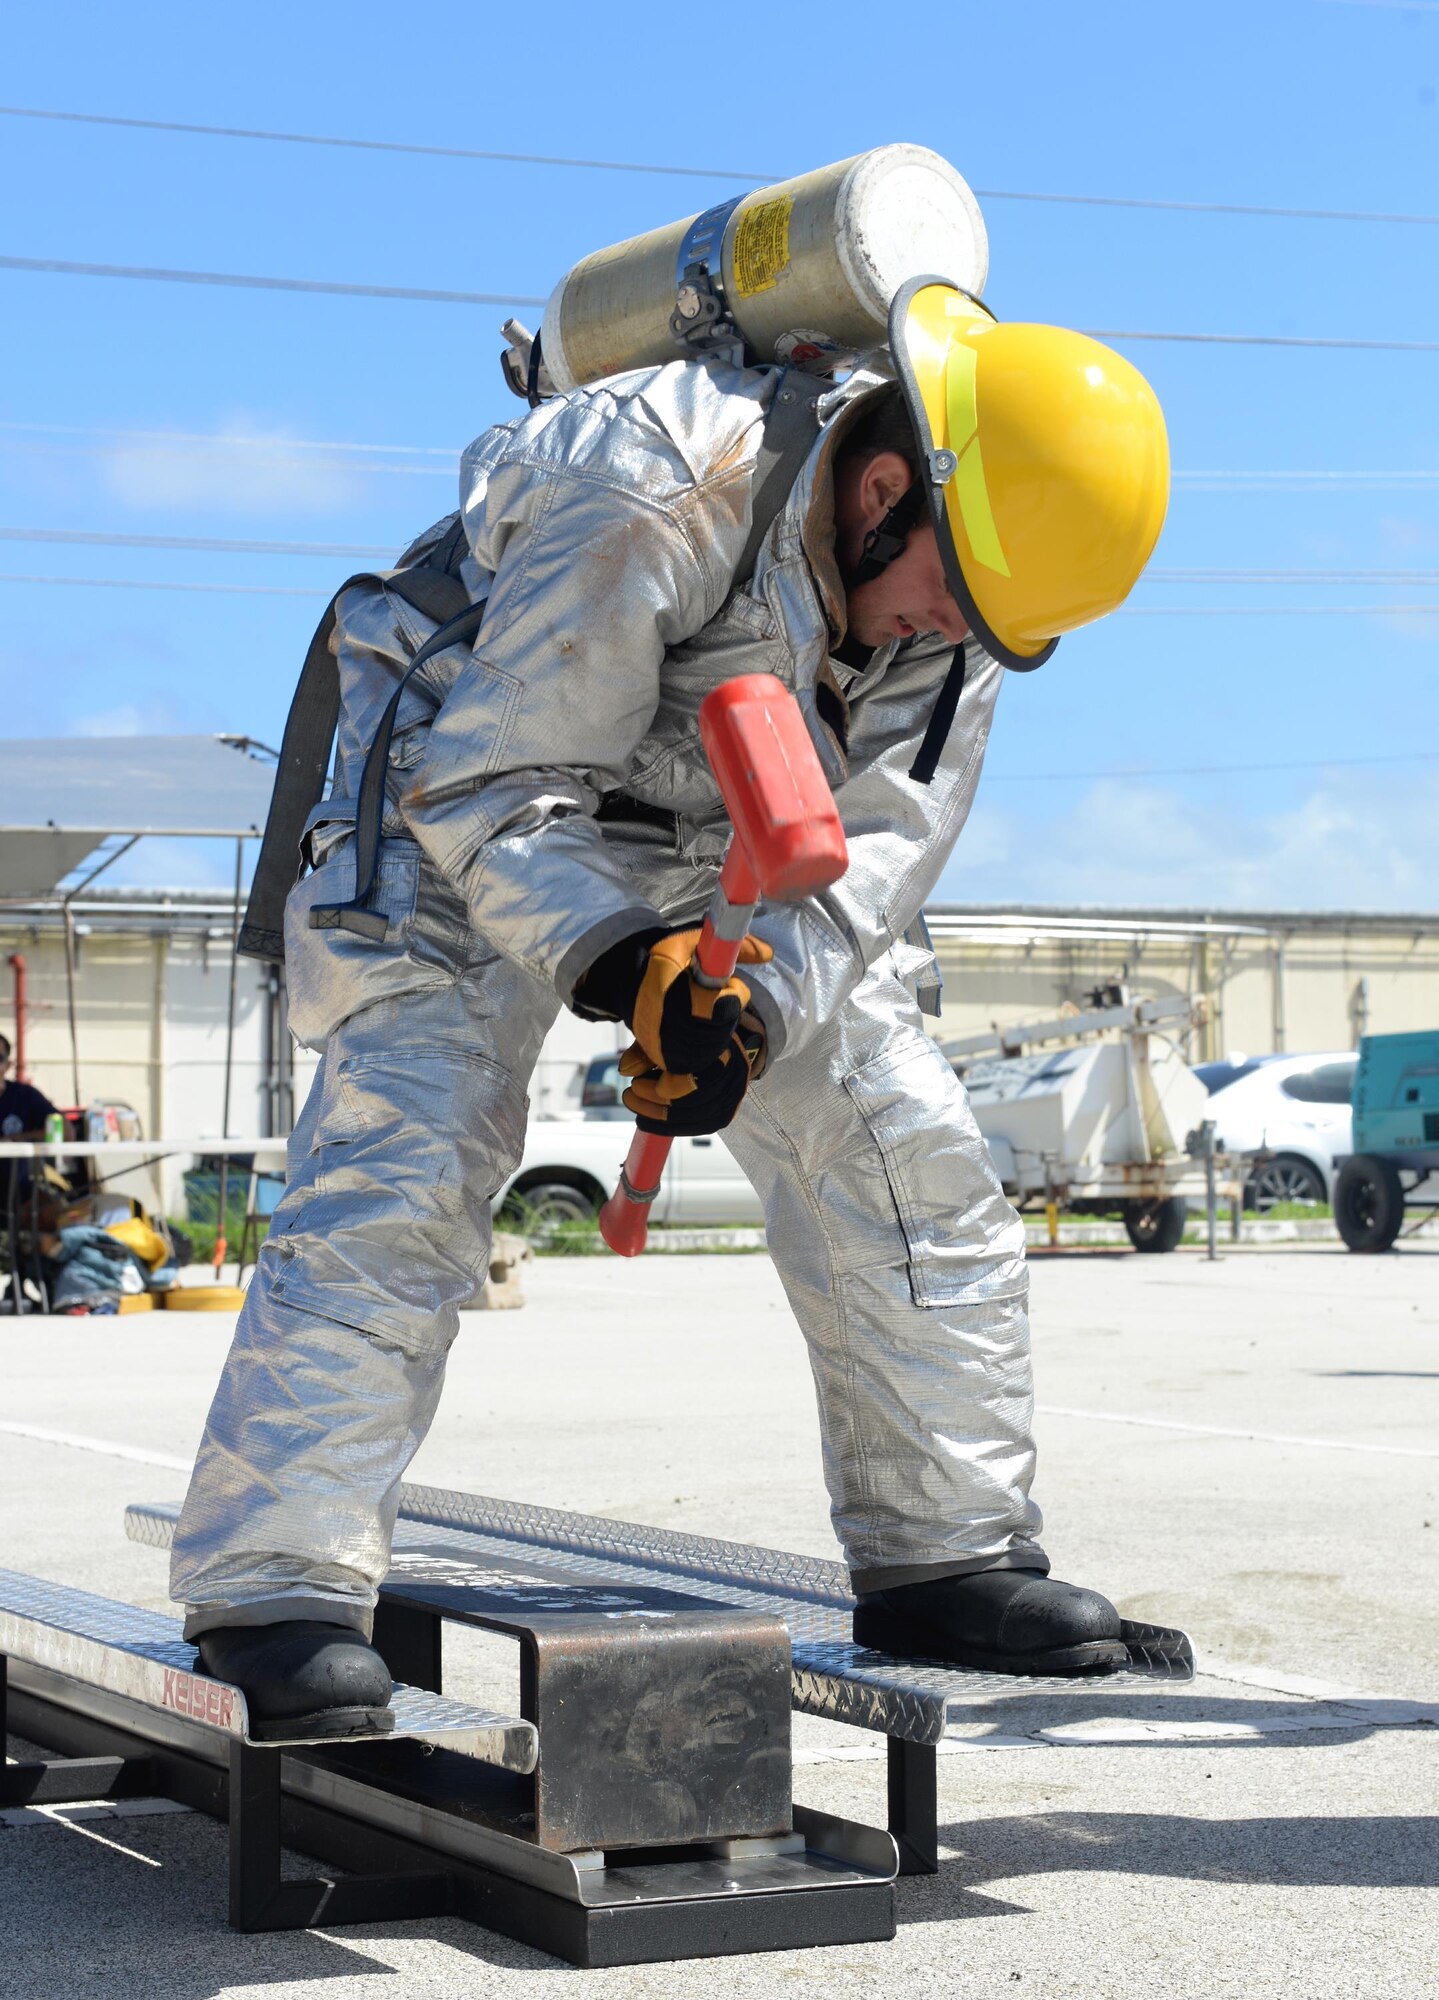 Airman 1st Class Zach Hamlette, 36th Civil Engineer Squadron fire protection crew chief, hits a weight during the annual Guam Fire Muster competition March 5, 2016, in Hagåtña, Guam. Hamlette used a sledgehammer to hit a weight across a Keiser sled, which is used to train firefighters on how to use axes for forced entry and ventilation on roofs and floors. (U.S. Air Force photo/Staff Sgt. Benjamin Gonsier)